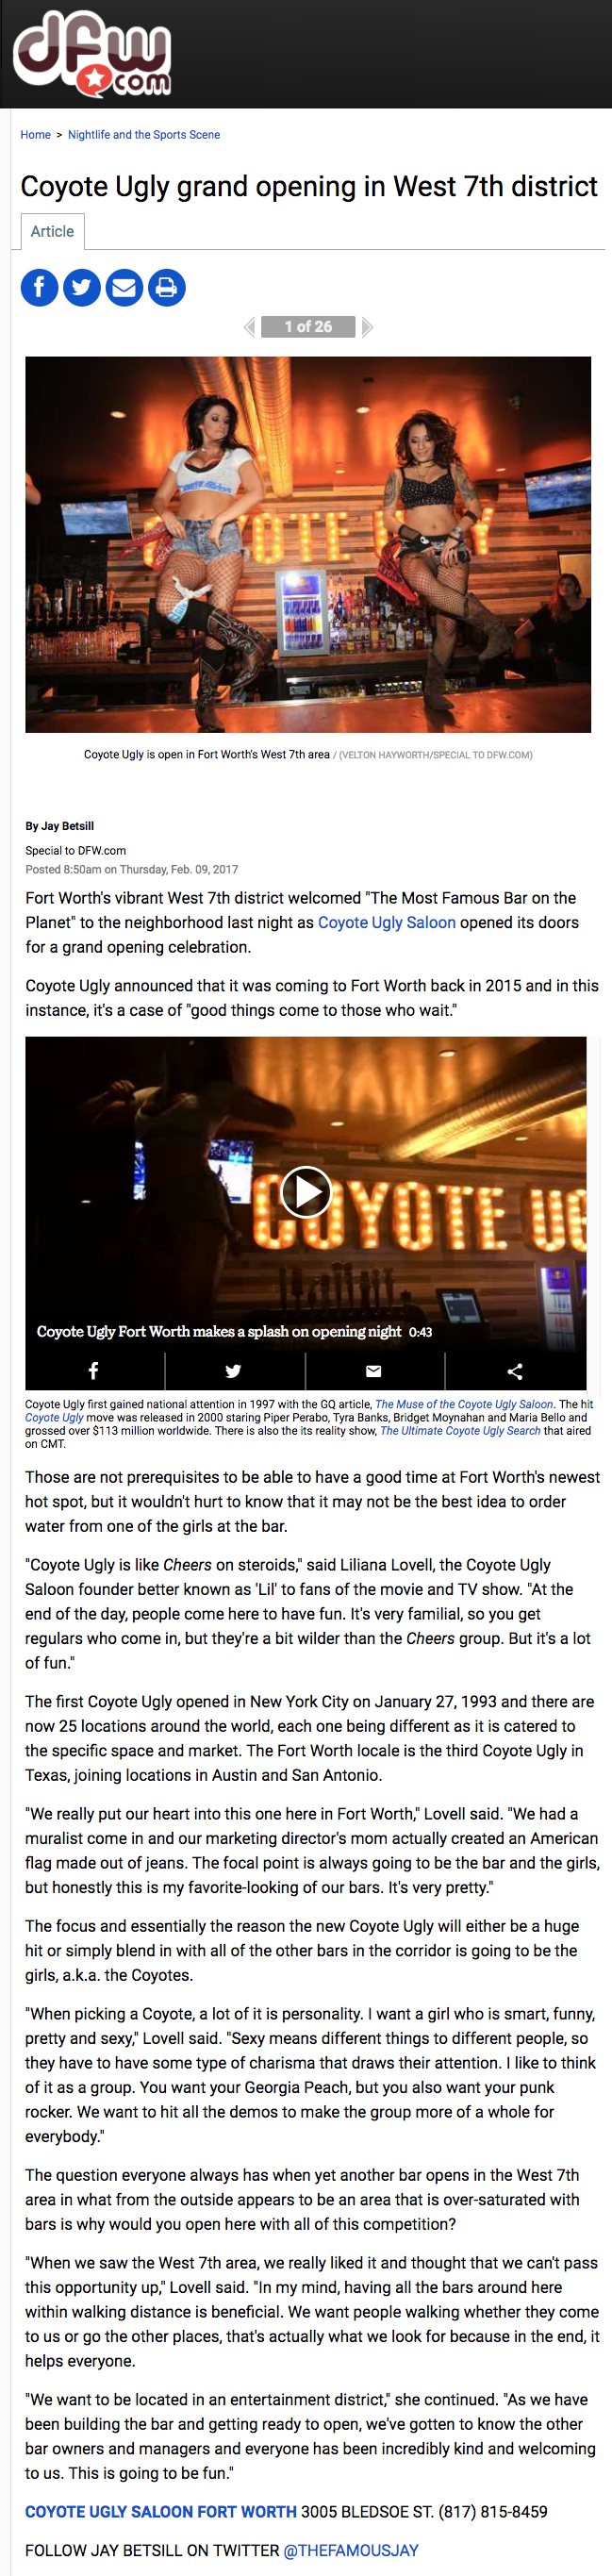 Coyote Ugly grand opening in West 7th district Star Telegram.com